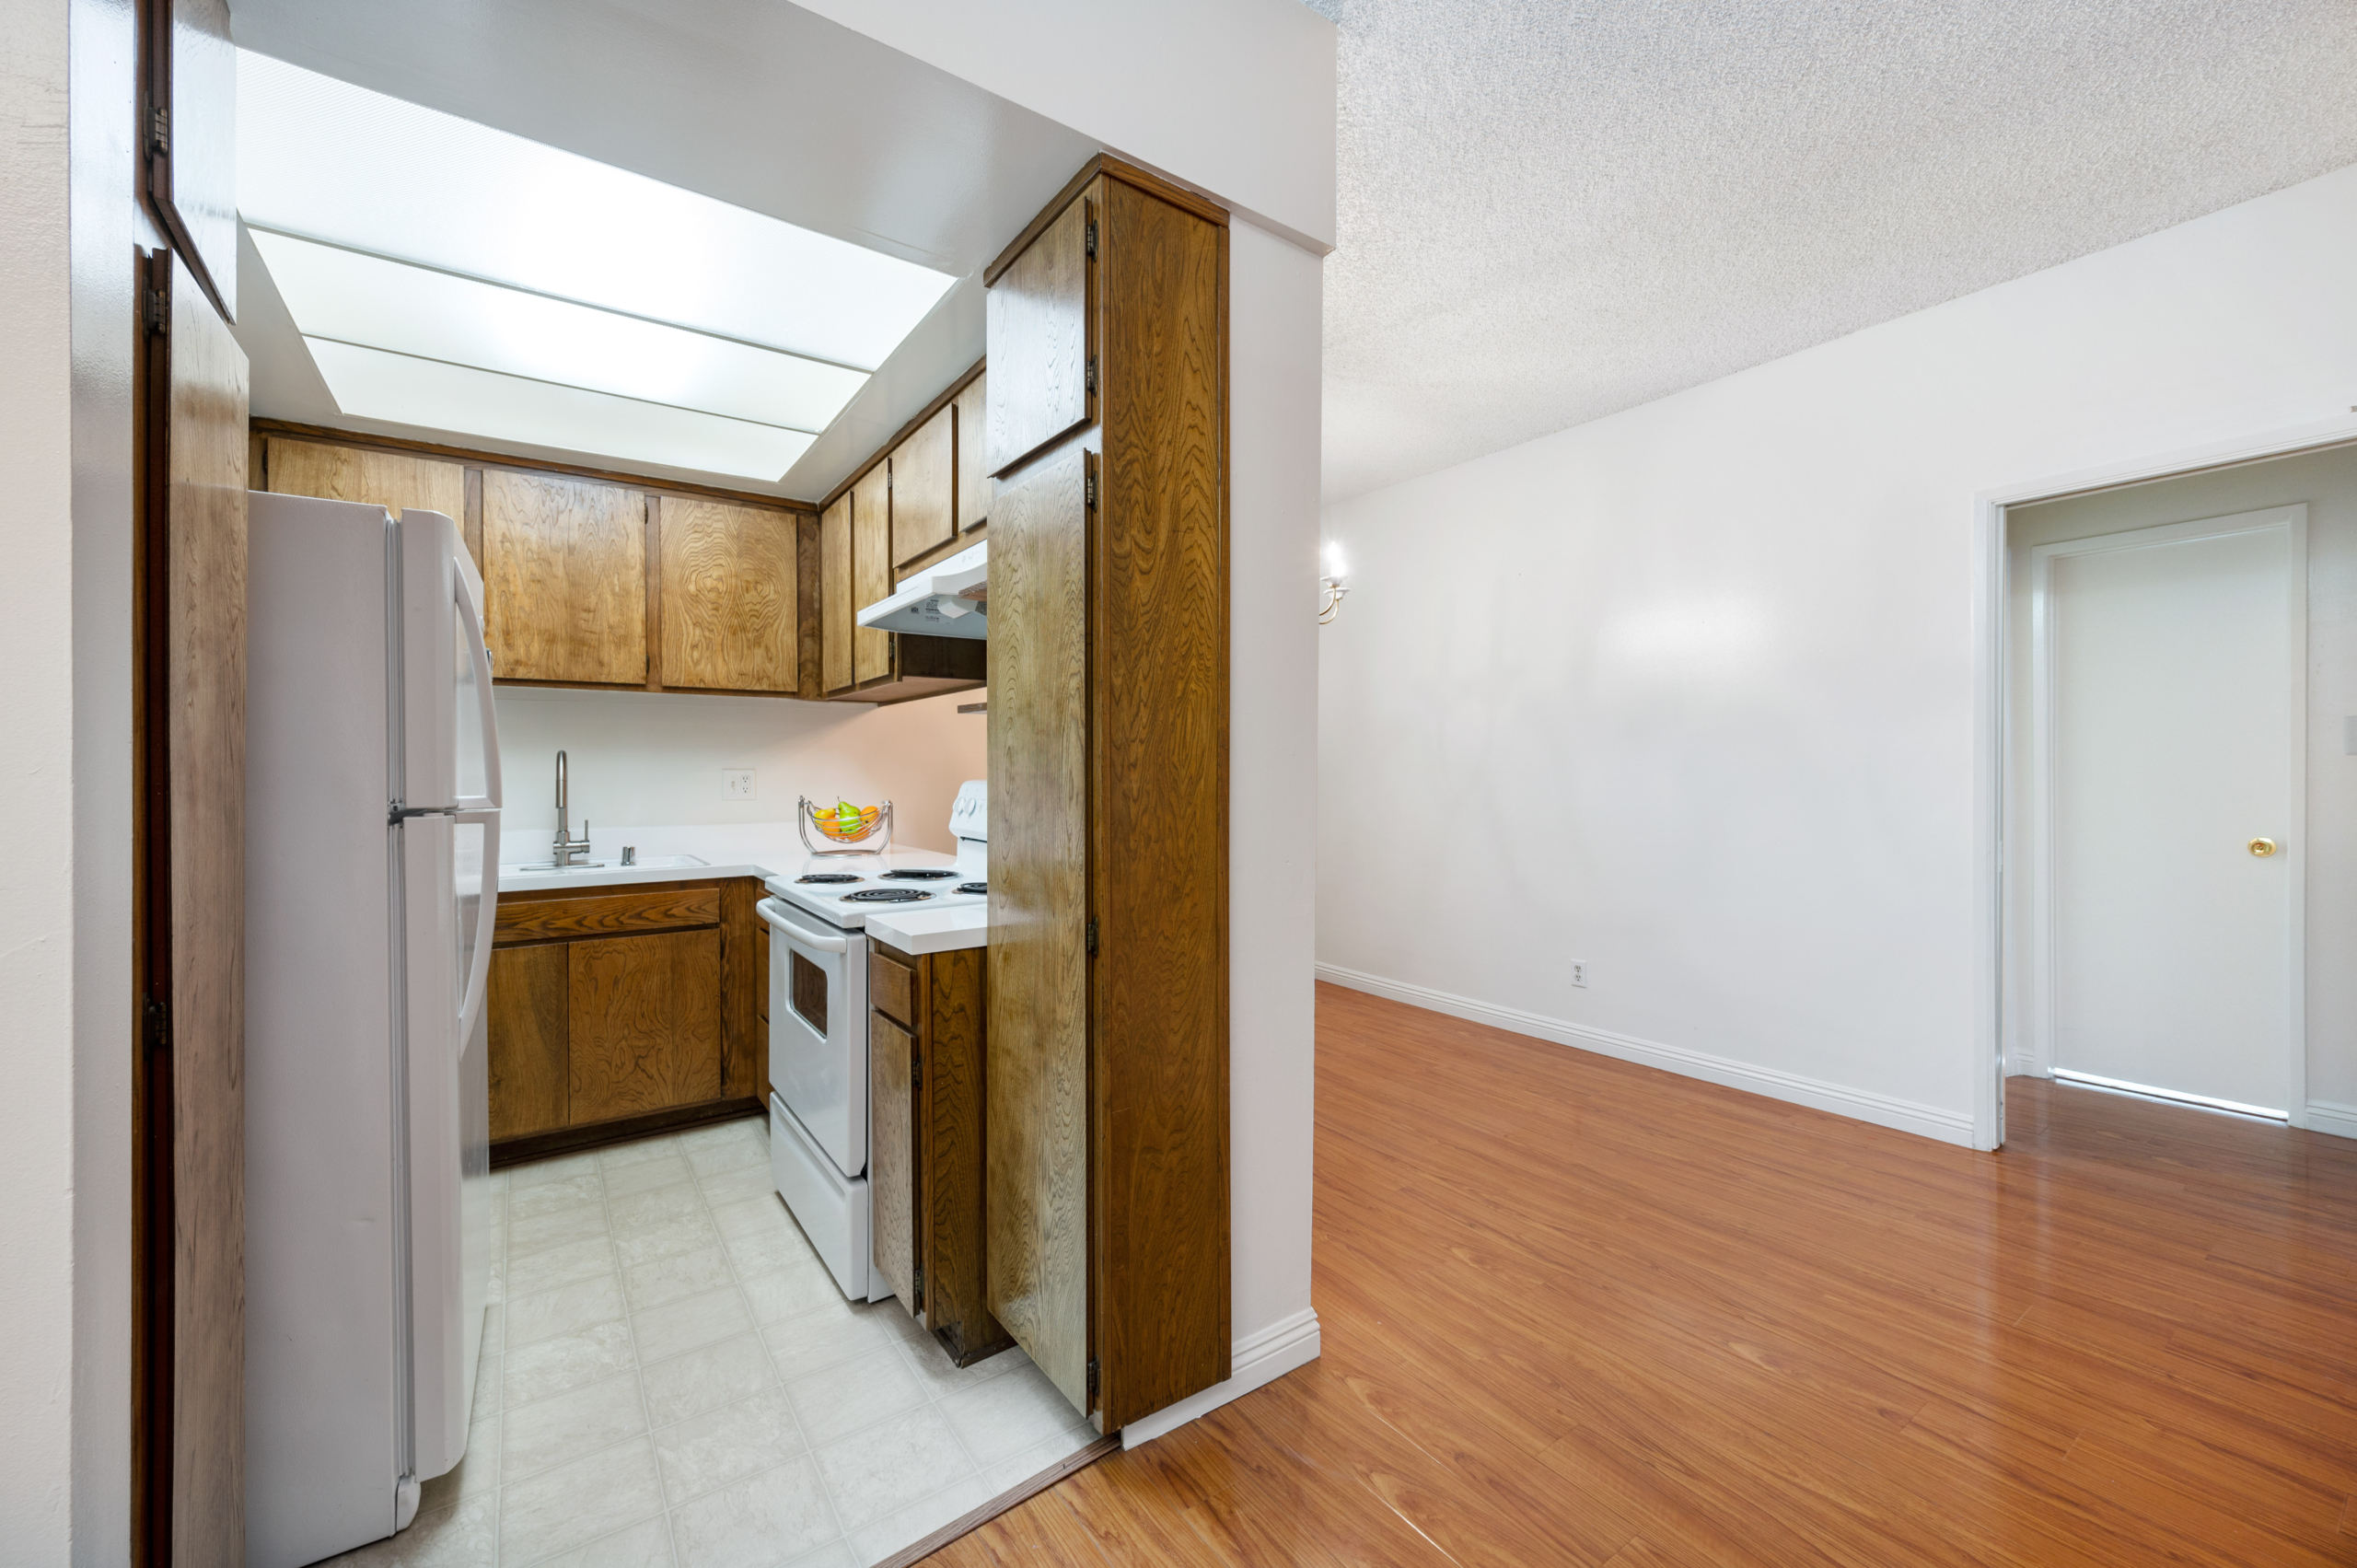 Kitchen/Dining area of of 440 Veteran Ave #307 Westwood